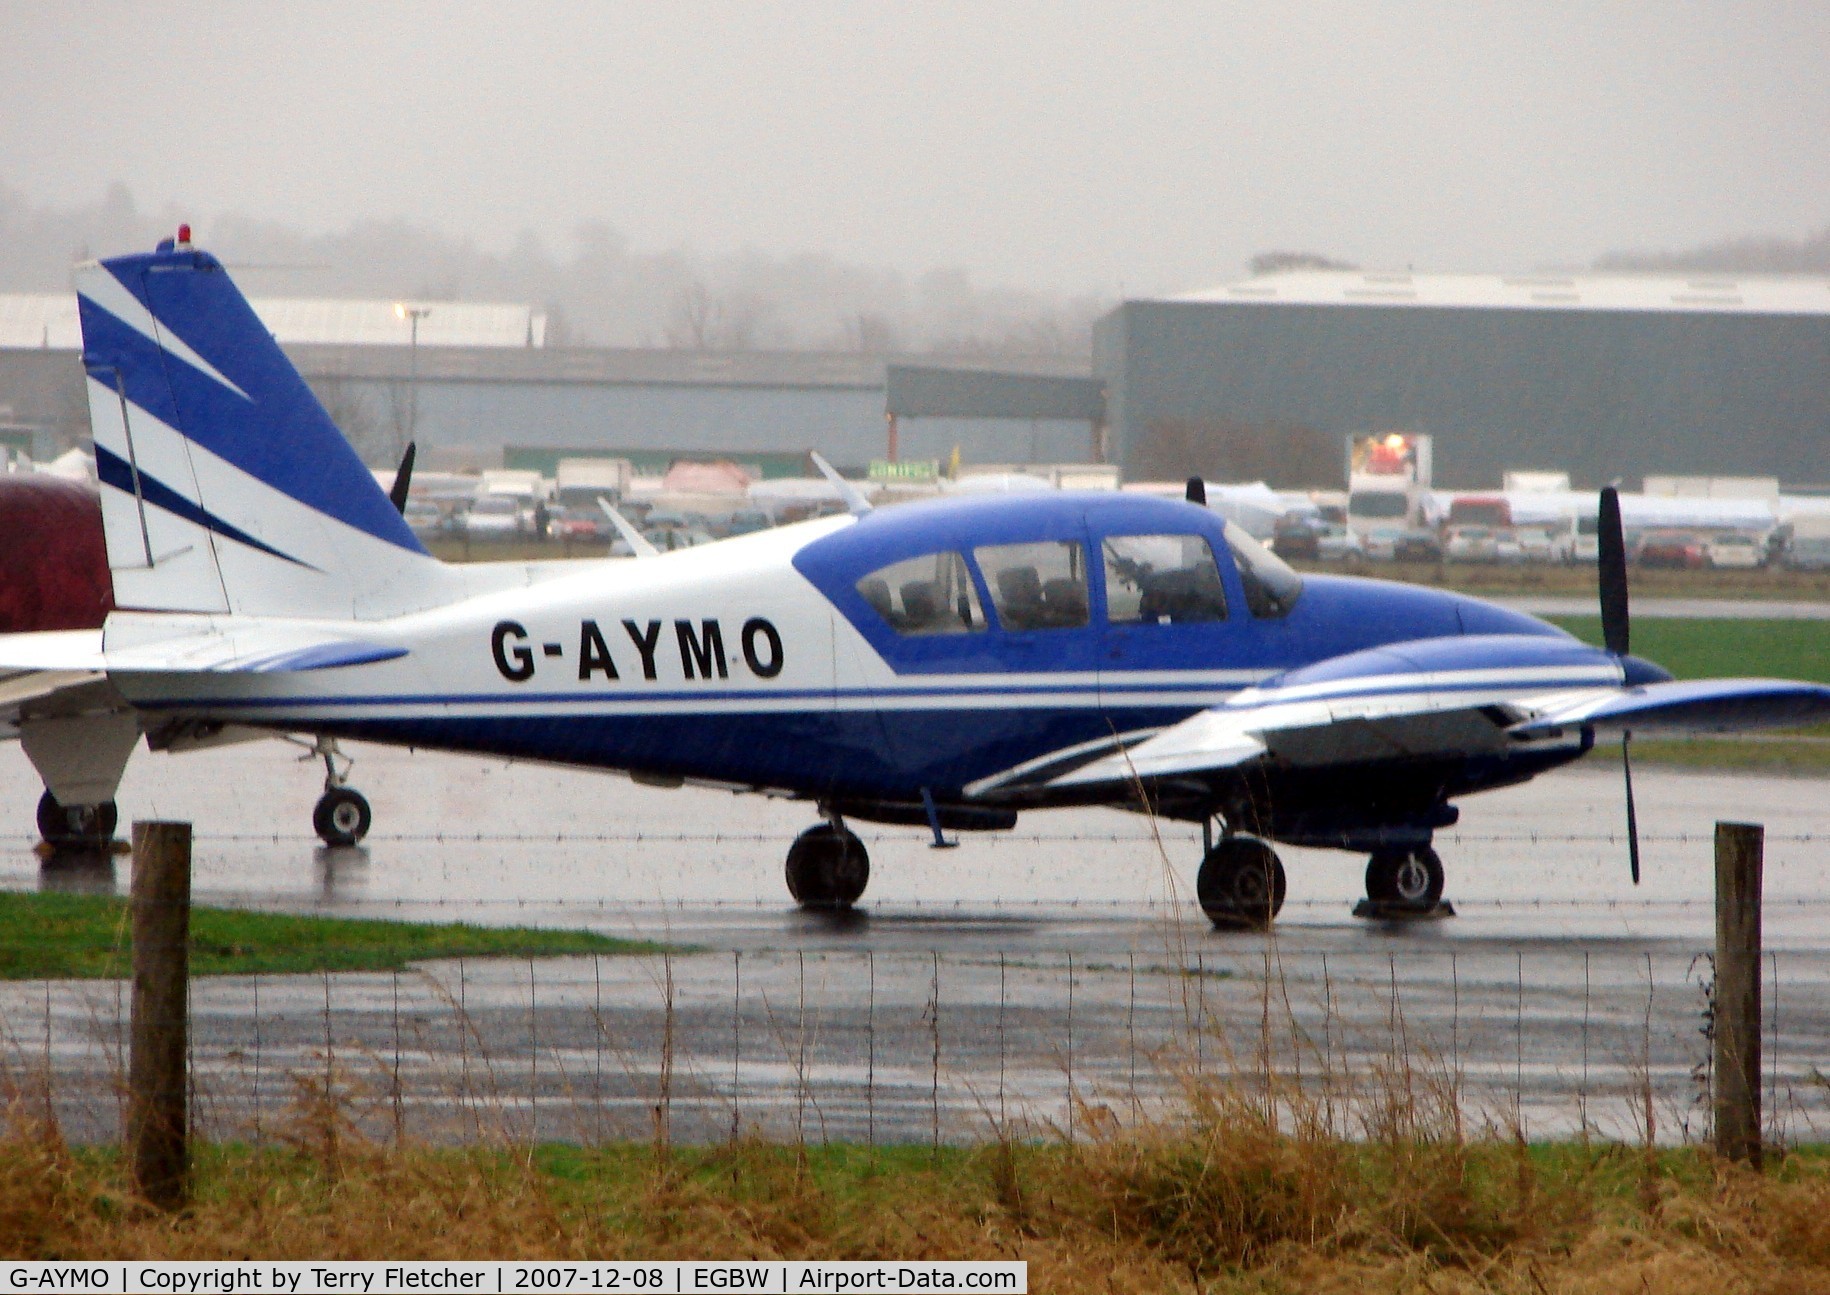 G-AYMO, 1965 Piper PA-23-250 Aztec C/N 27-2995, Pa-23-250 on a wet morning at Wellesbourne